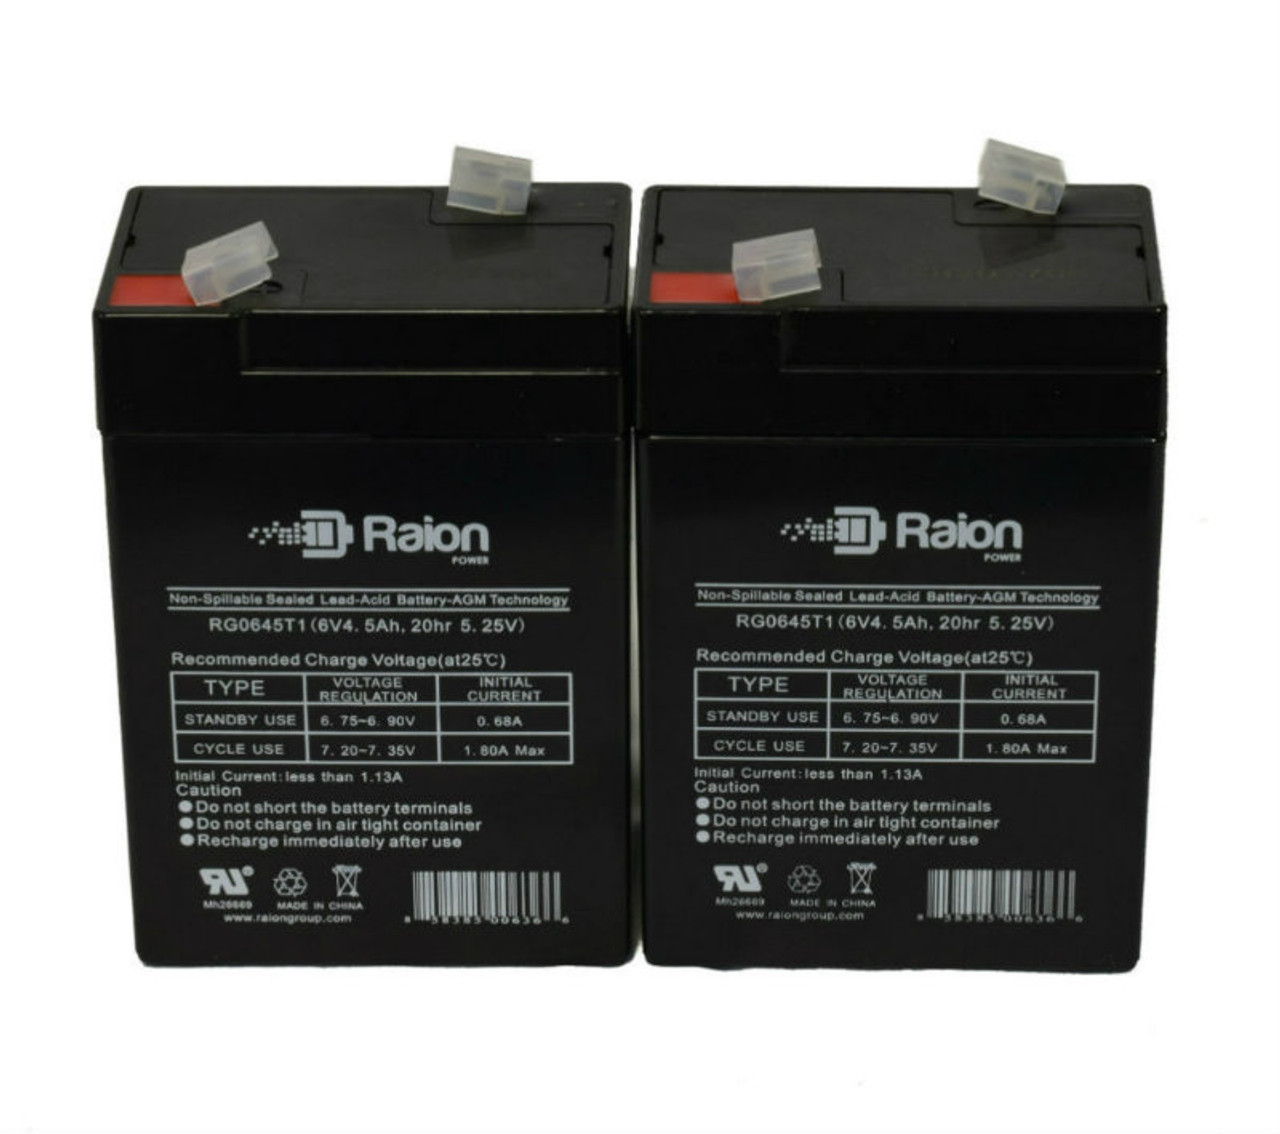 Raion Power 6V 4.5Ah Replacement Emergency Light Battery for Carpenter Watchman 713527 - 2 Pack